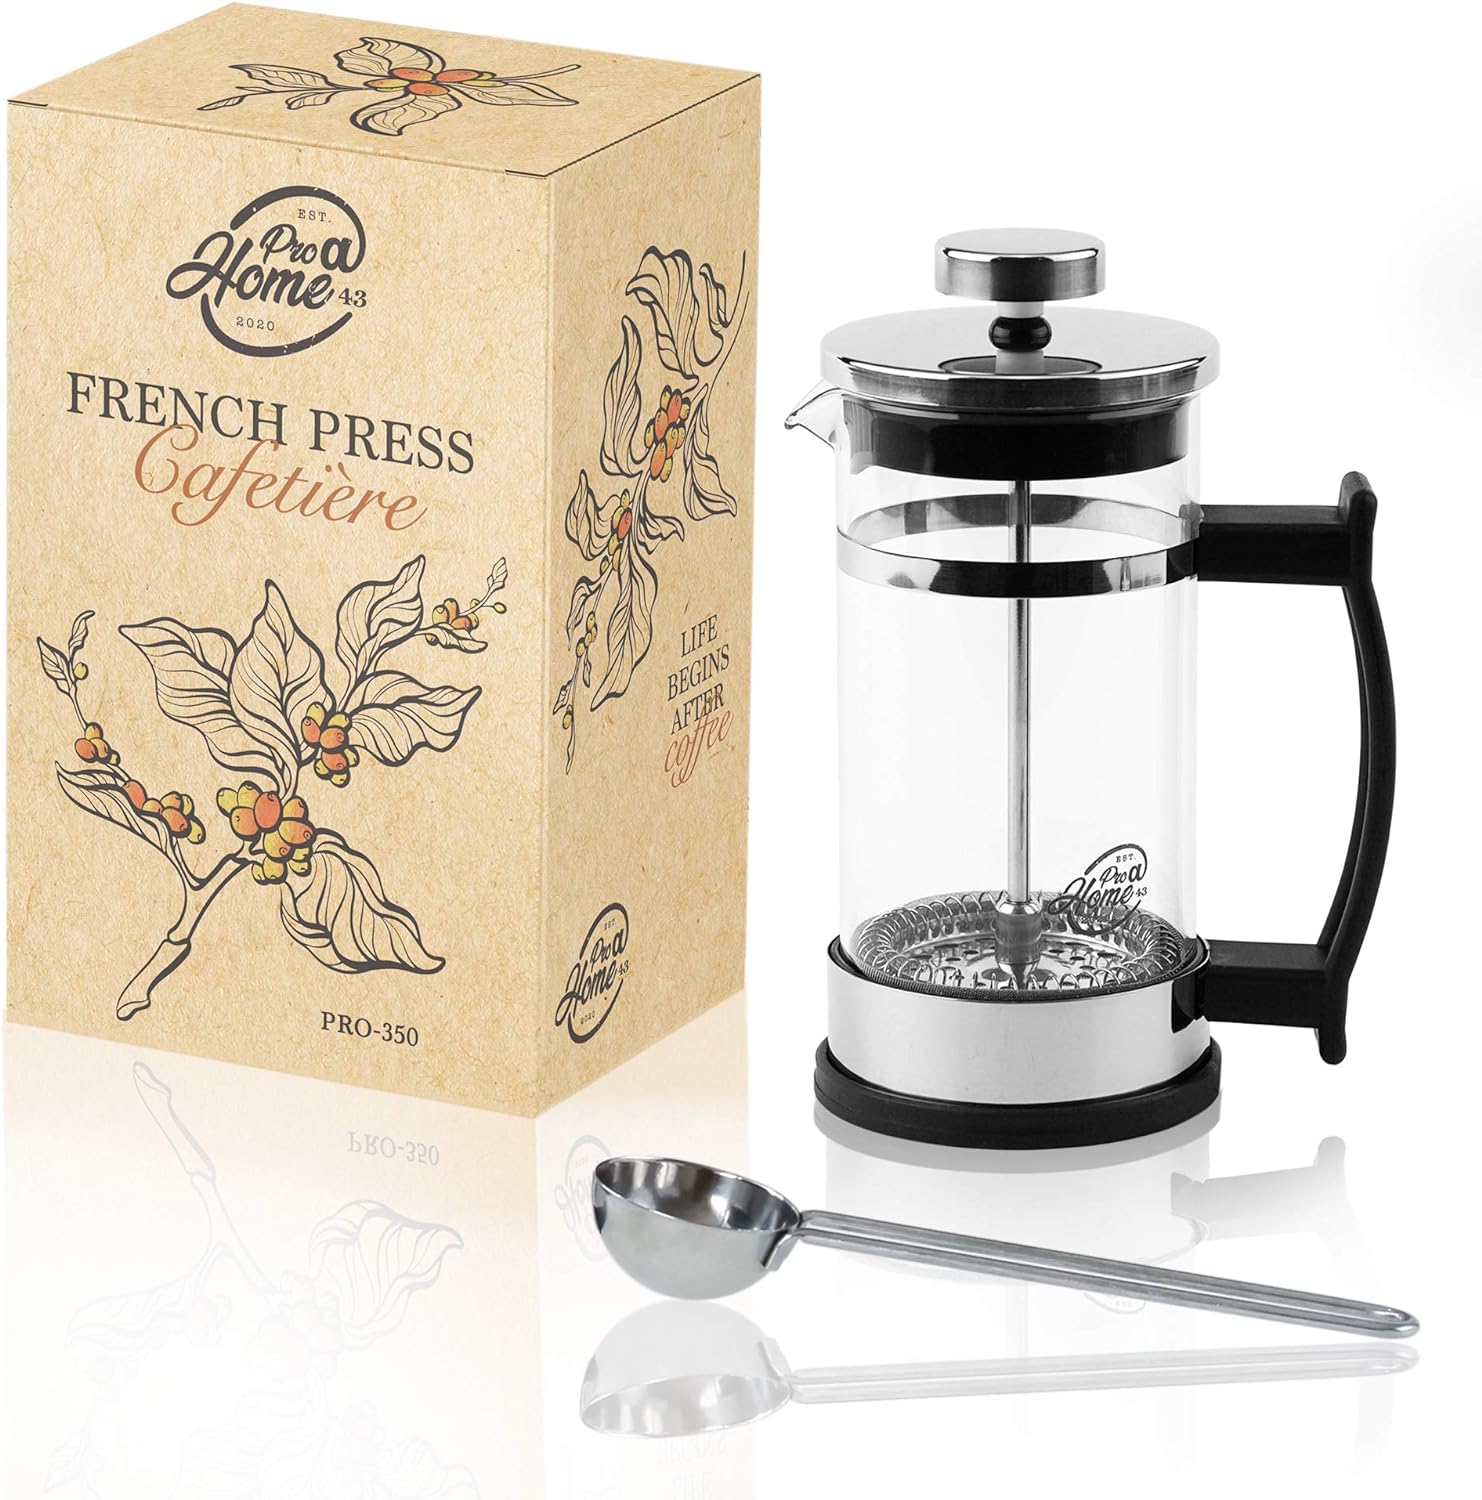 Pro@Home43 French Press / Coffee Maker Made of Glass / Coffee Press / Cafetière / with Stainless Steel Measuring Spoon